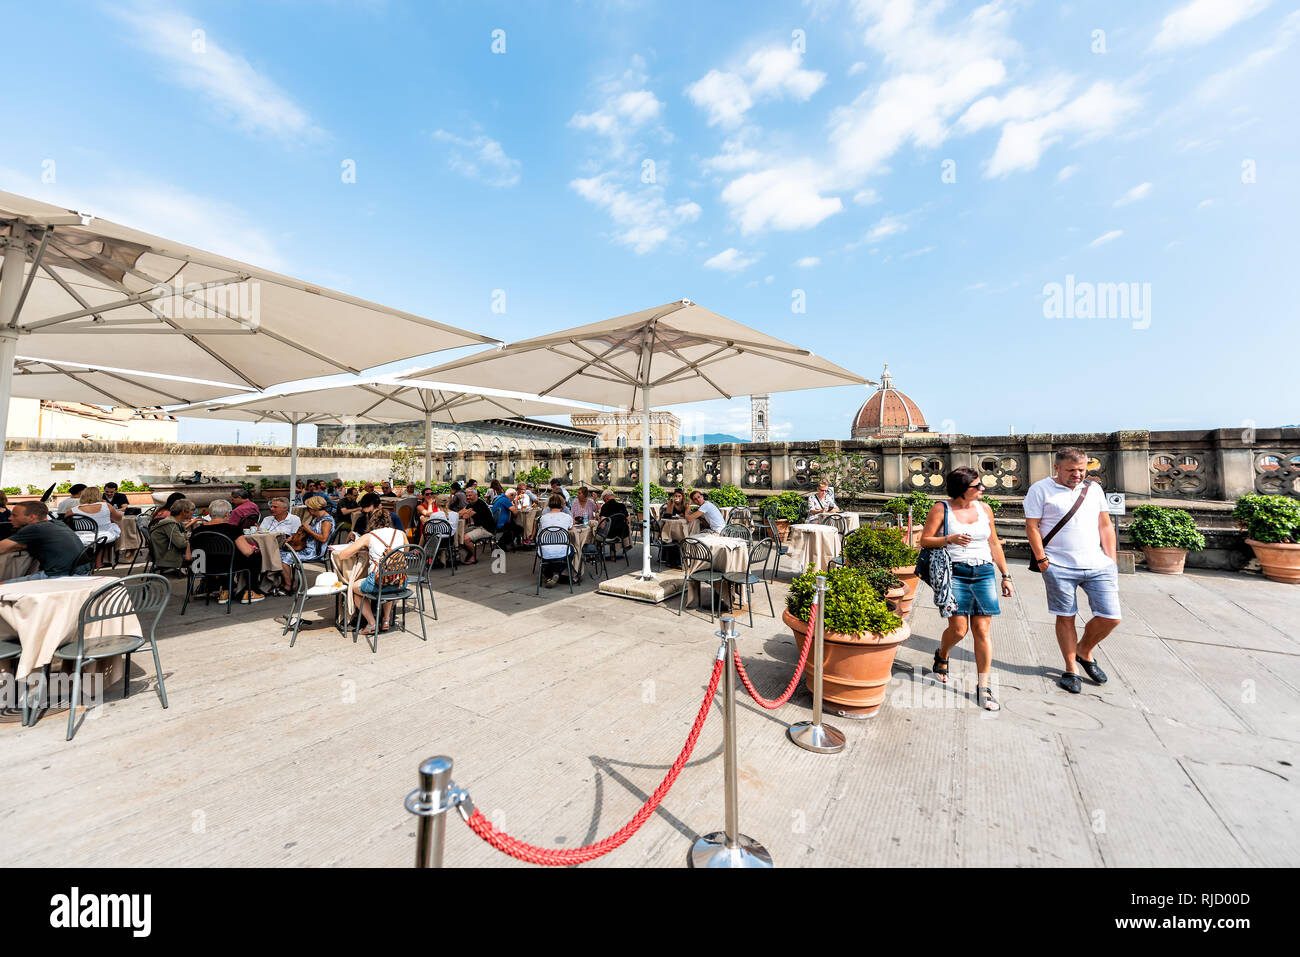 Firenze, Italy - August 30, 2018: Many people by cafe on terrace of famous Florence Uffizi art museum gallery with view of old building church duomo Stock Photo